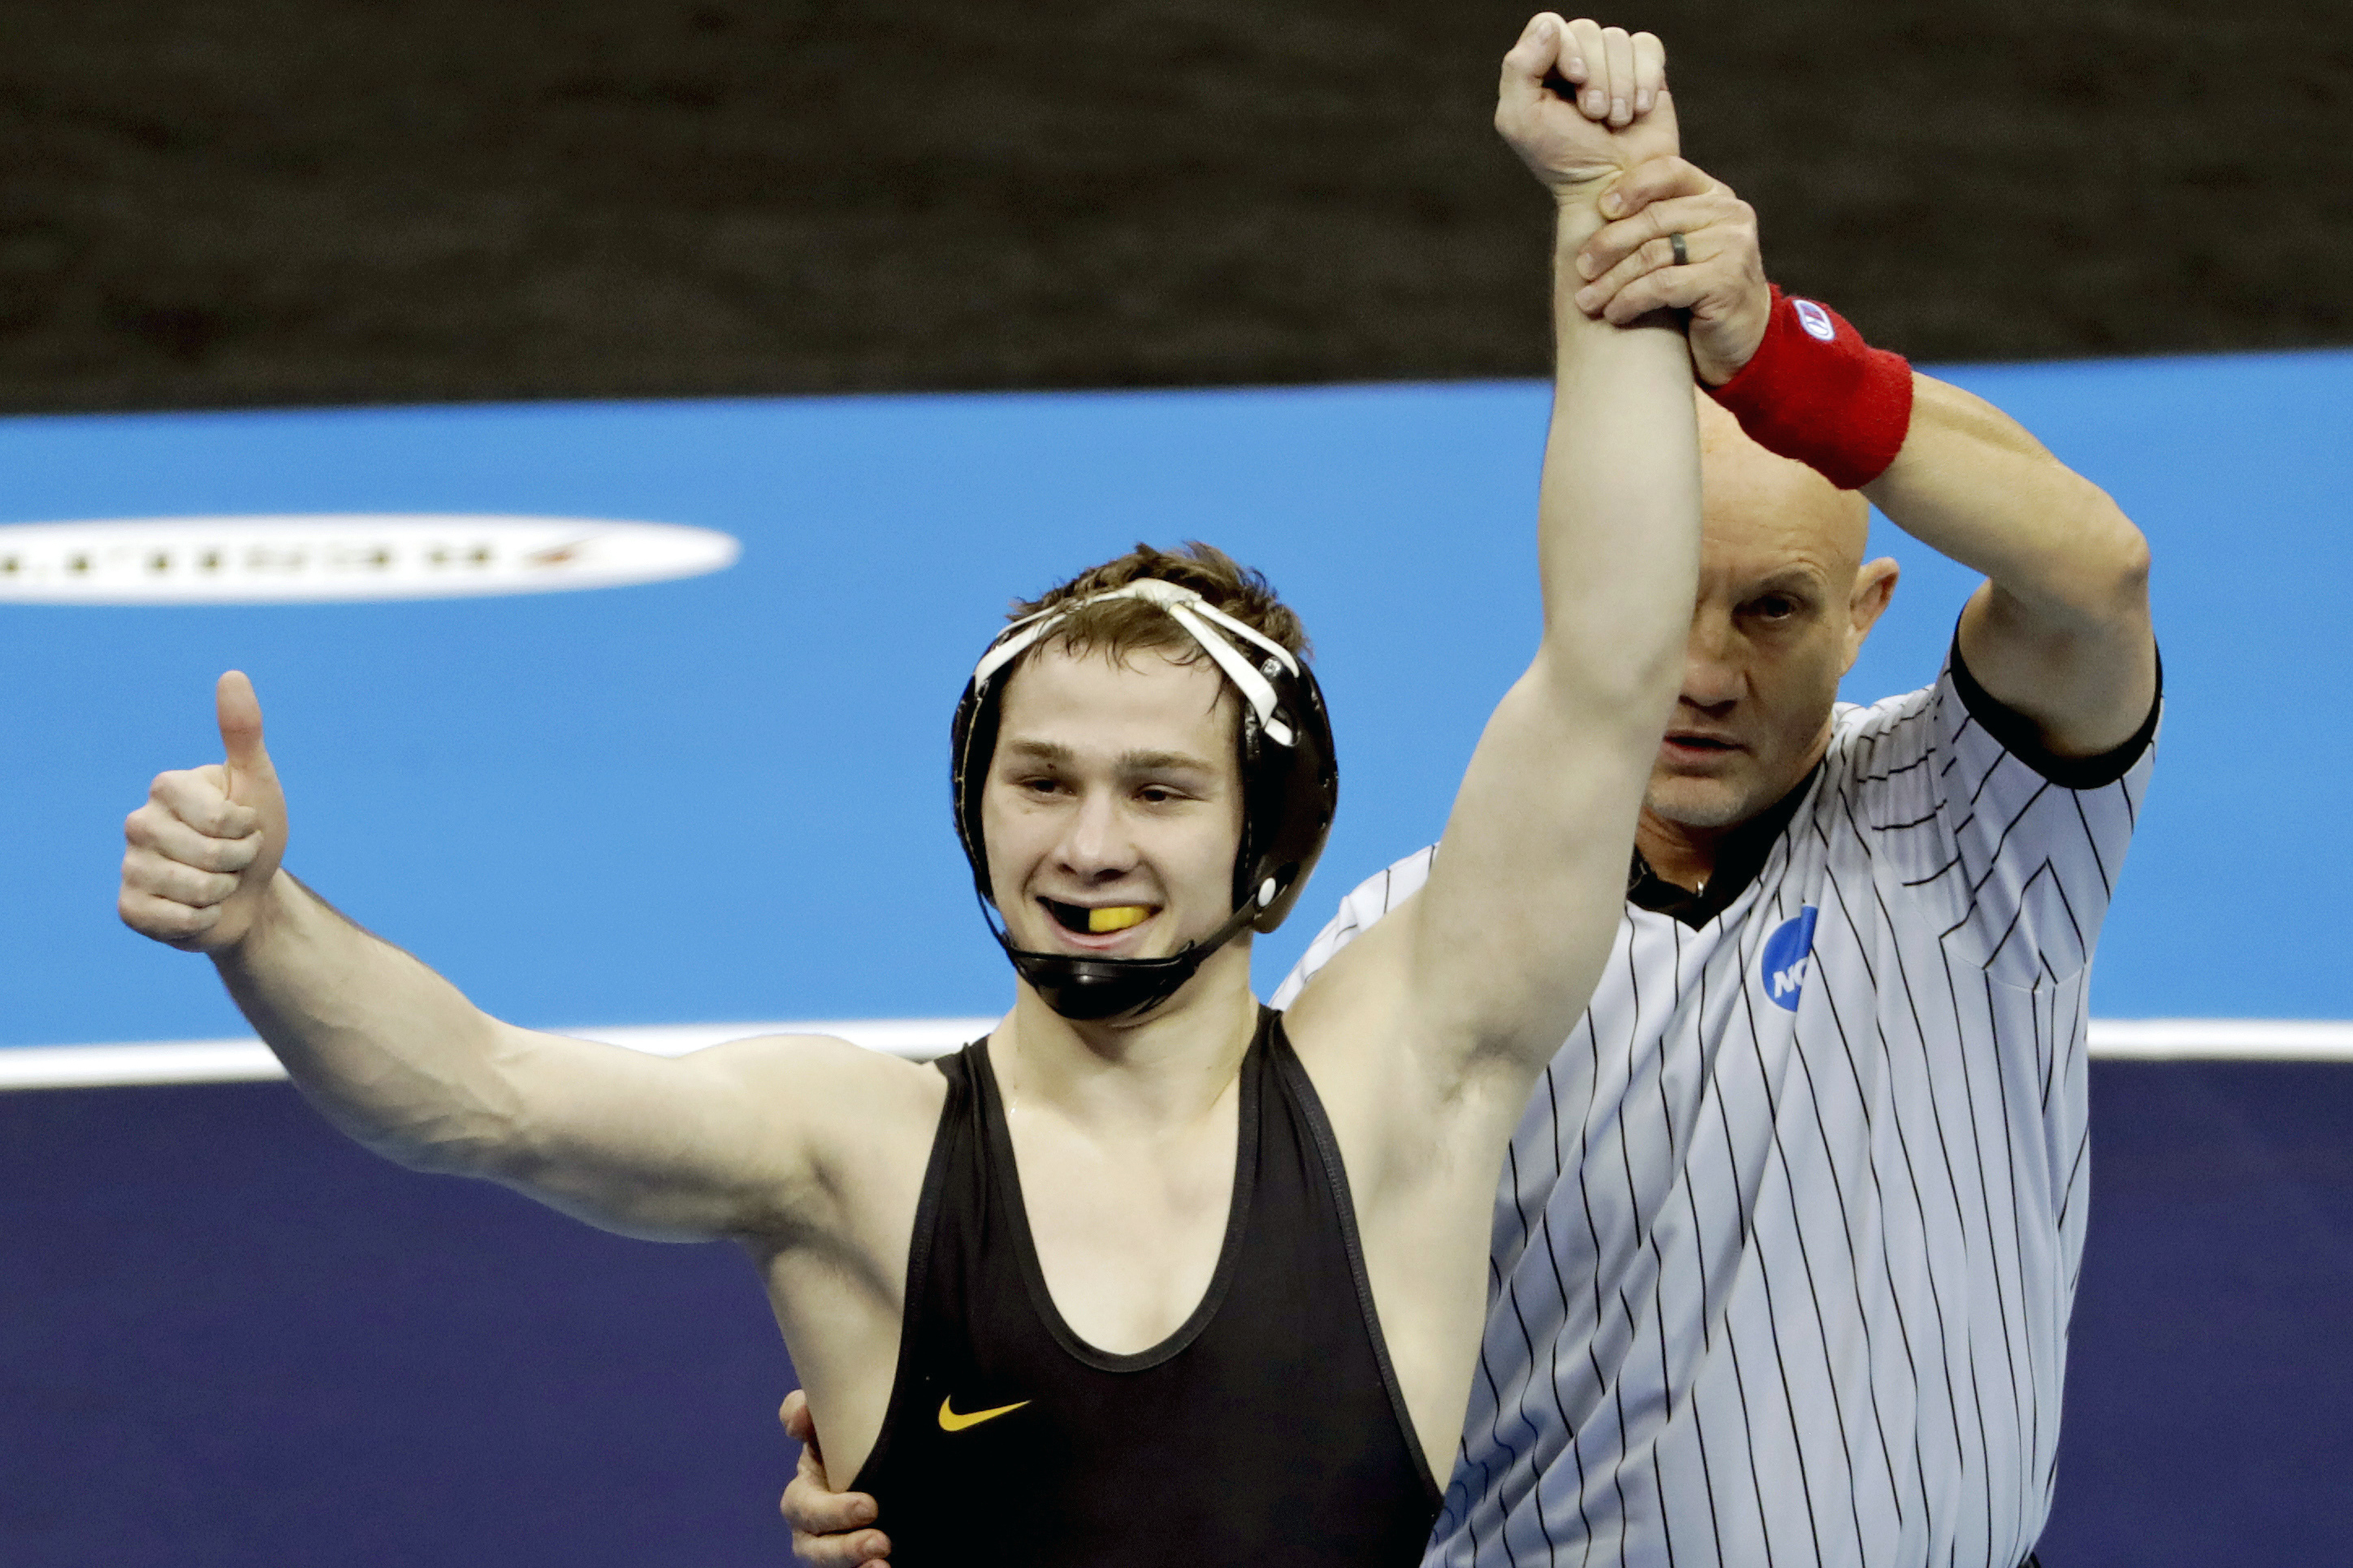 NCAA college wrestling championship schedule 2021 Time, TV channel, live stream, how to watch